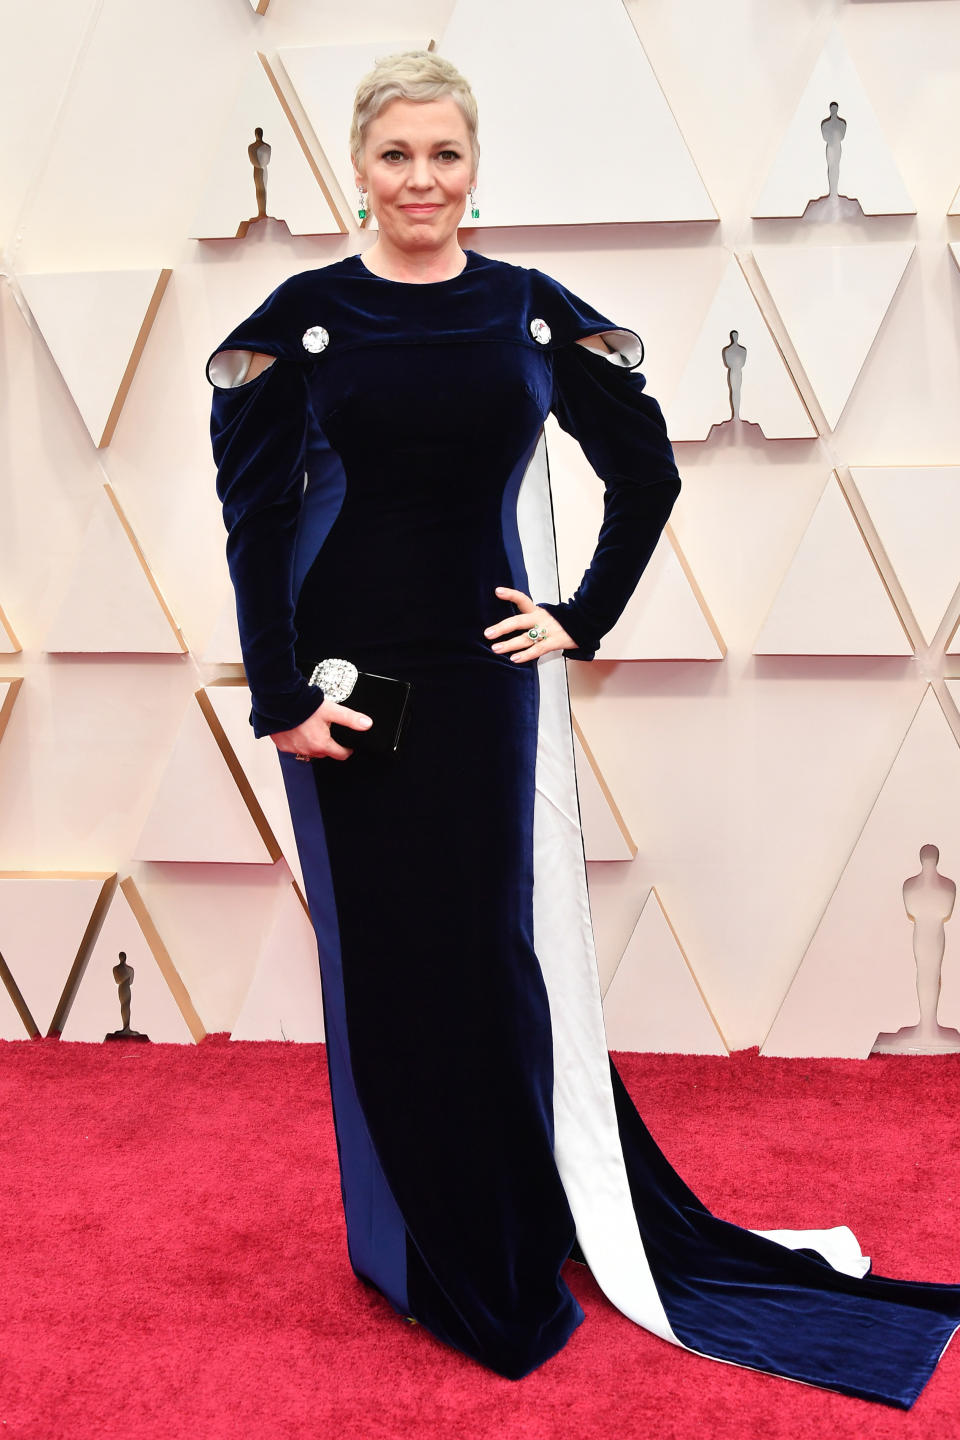 Last year's Best Actress winner kept warm in a sleeved Stella McCartney gown with structured shoulder detailing.